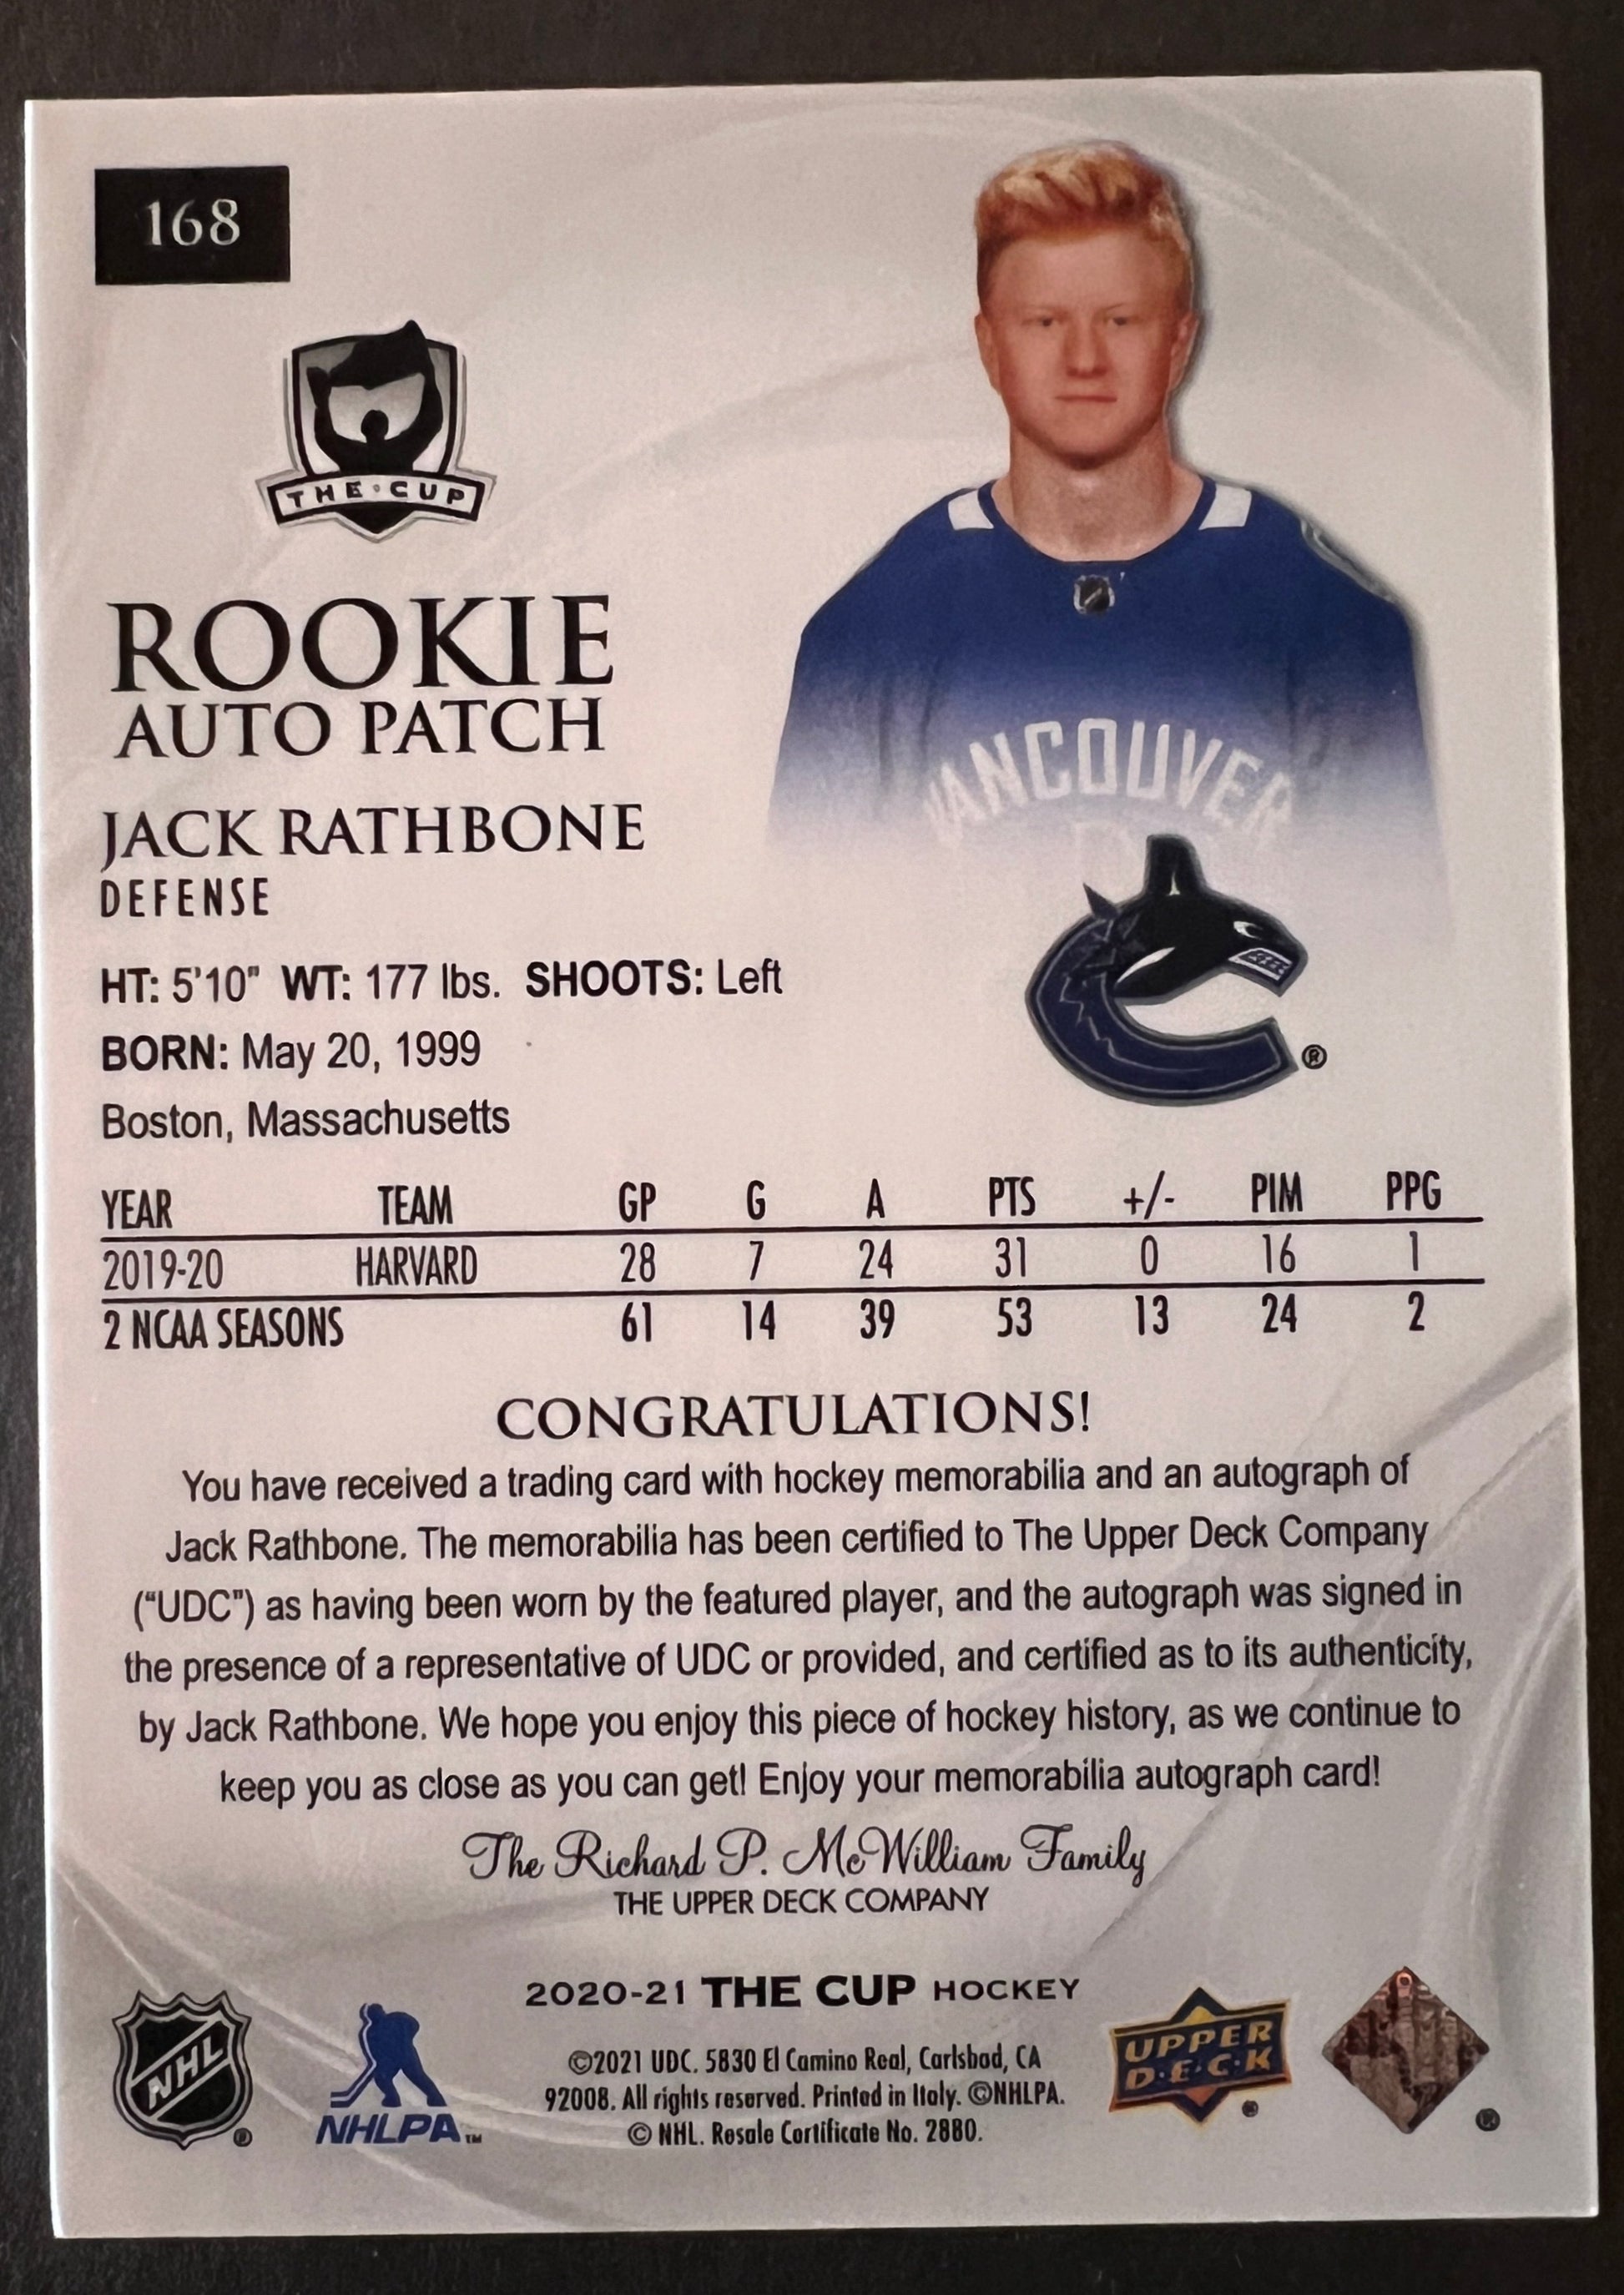 Jack Rathbone Rookie Auto Patch /249 - 2020/21 The Cup